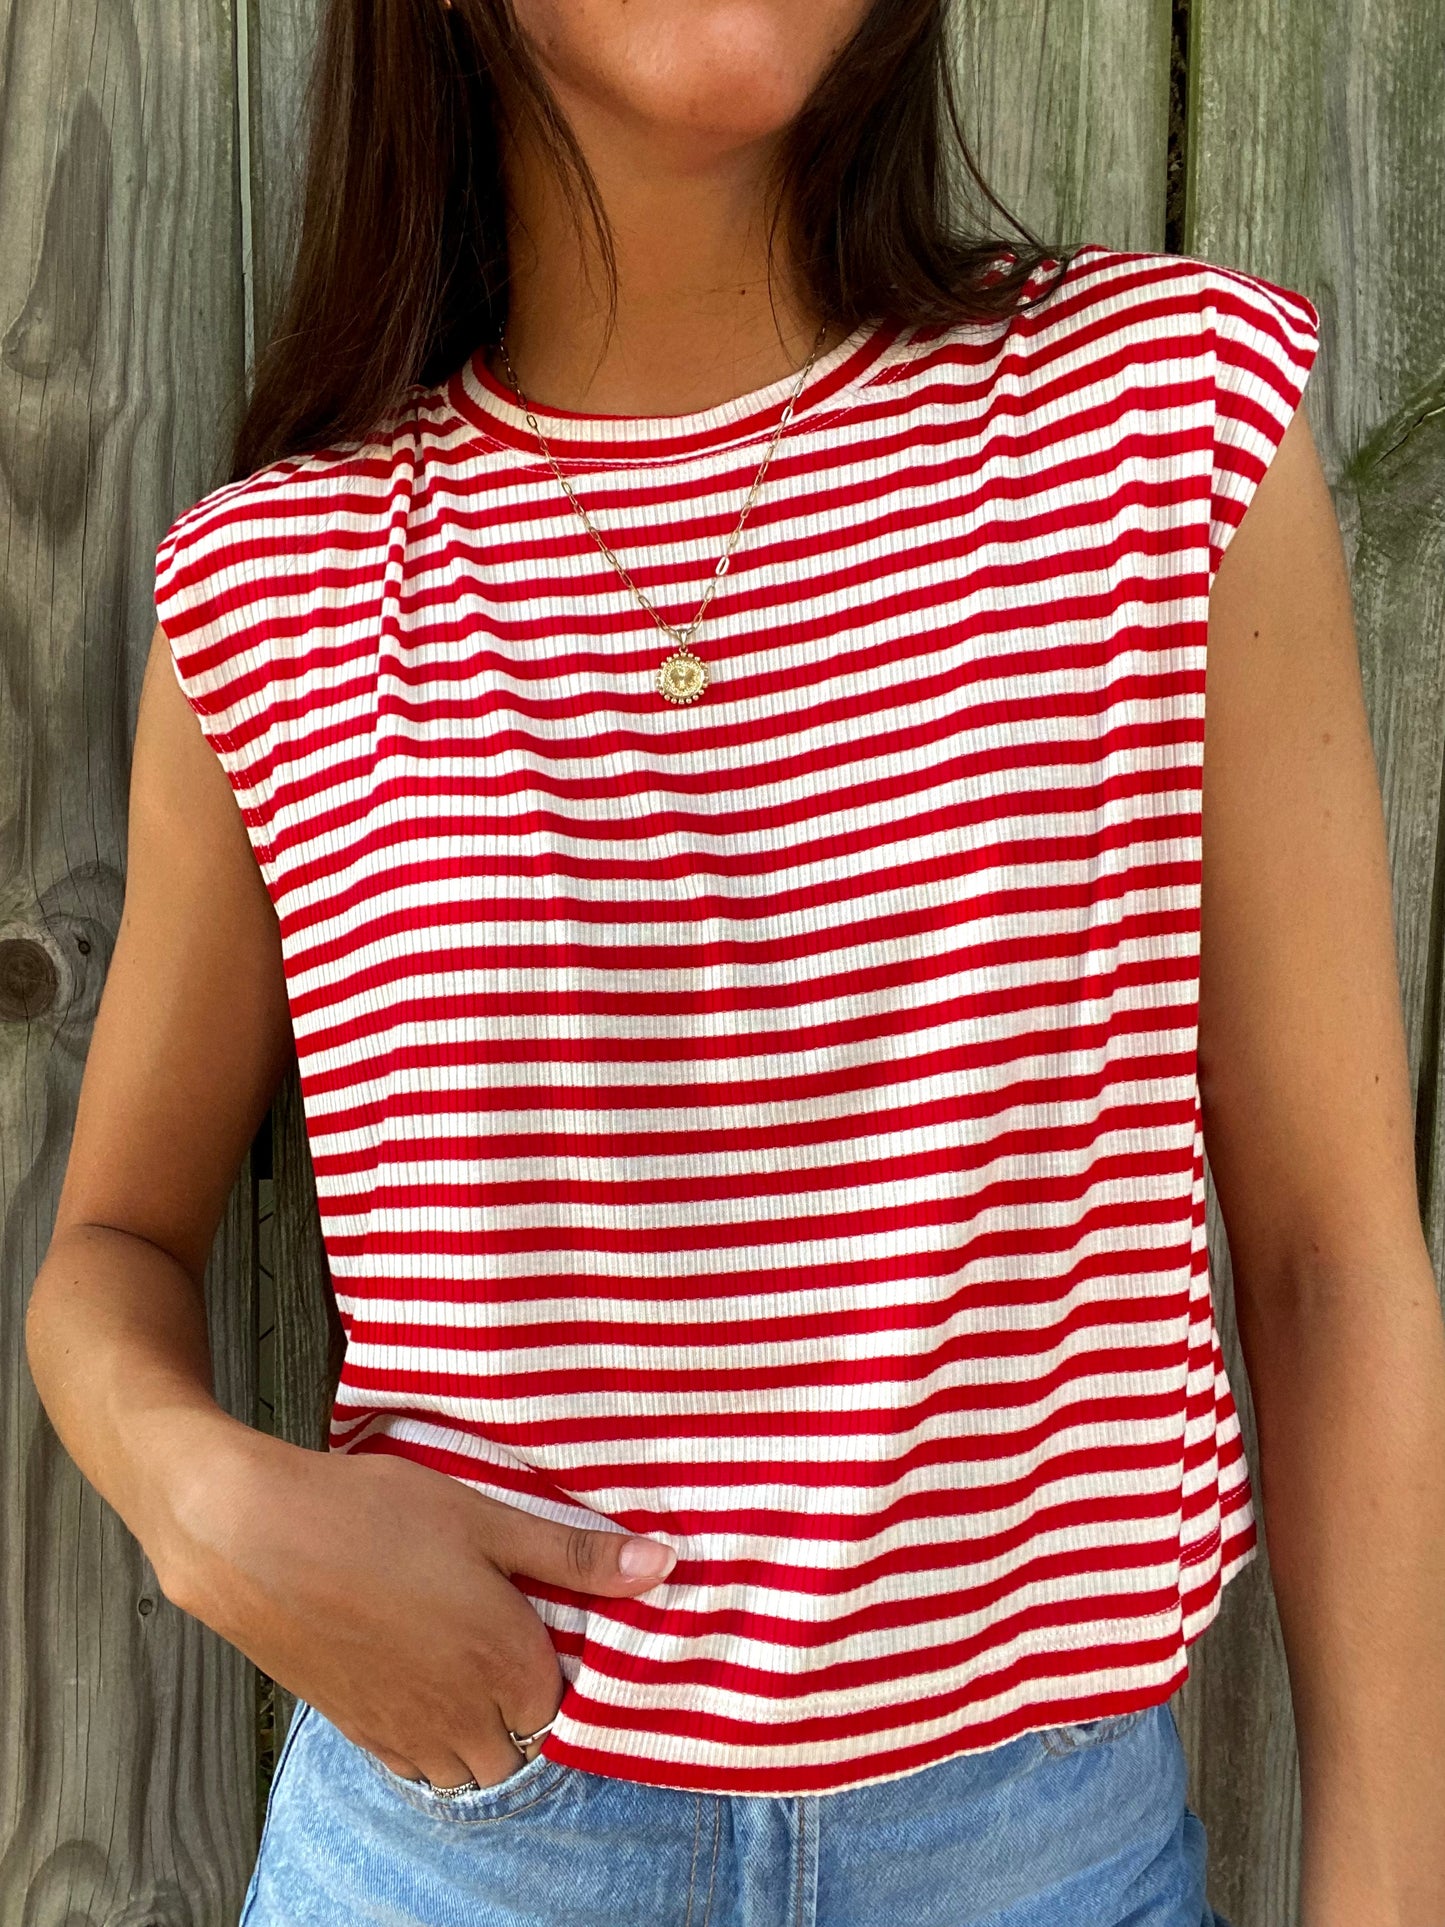 Red And White Striped Sleeveless Top